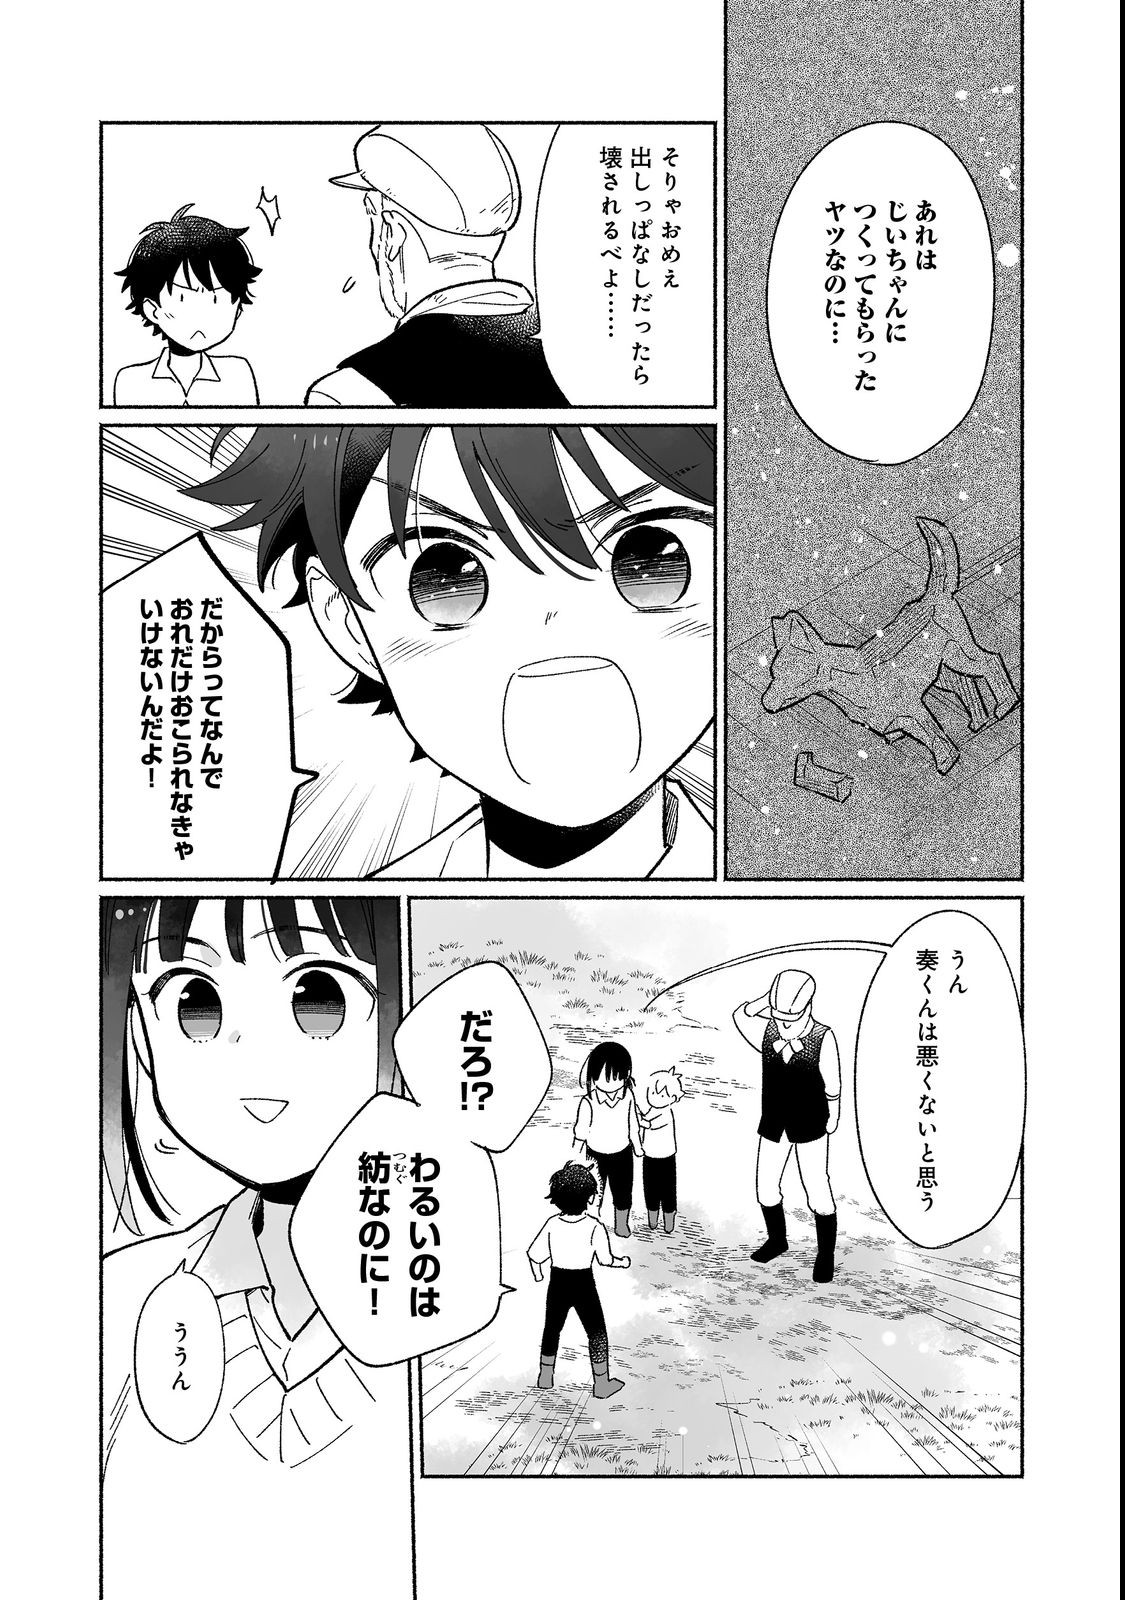 I’m the White Pig Nobleman 第18.1話 - Page 10